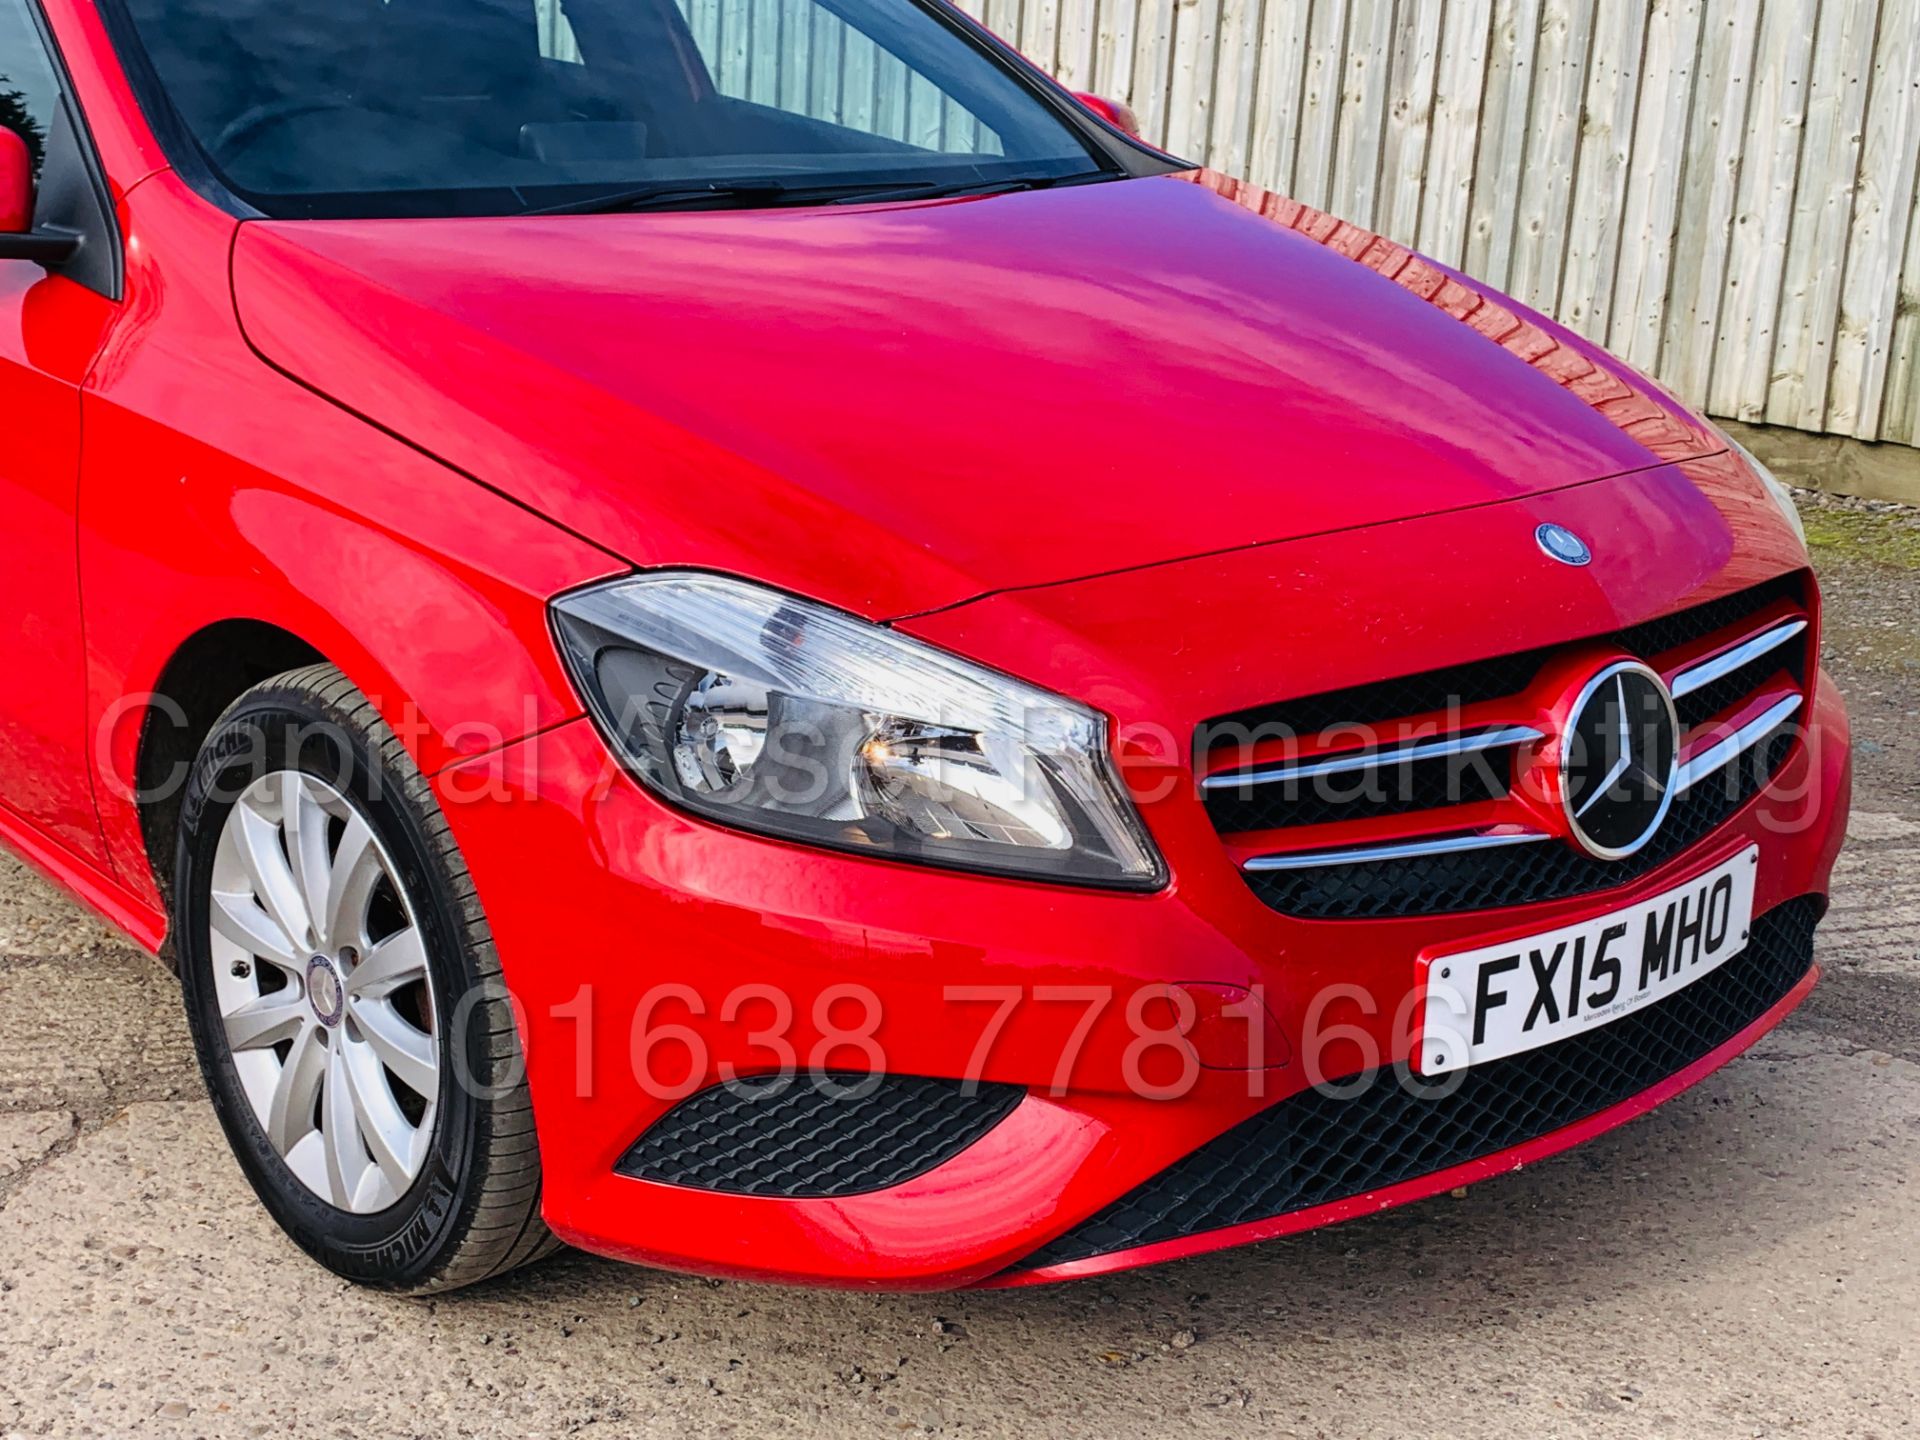 (ON SALE) MERCEDES-BENZ A180 *5 DOOR HATCHBACK* (2015 - NEW MODEL) '1.5 CDI - 7-G TRONIC AUTO' - Image 13 of 43